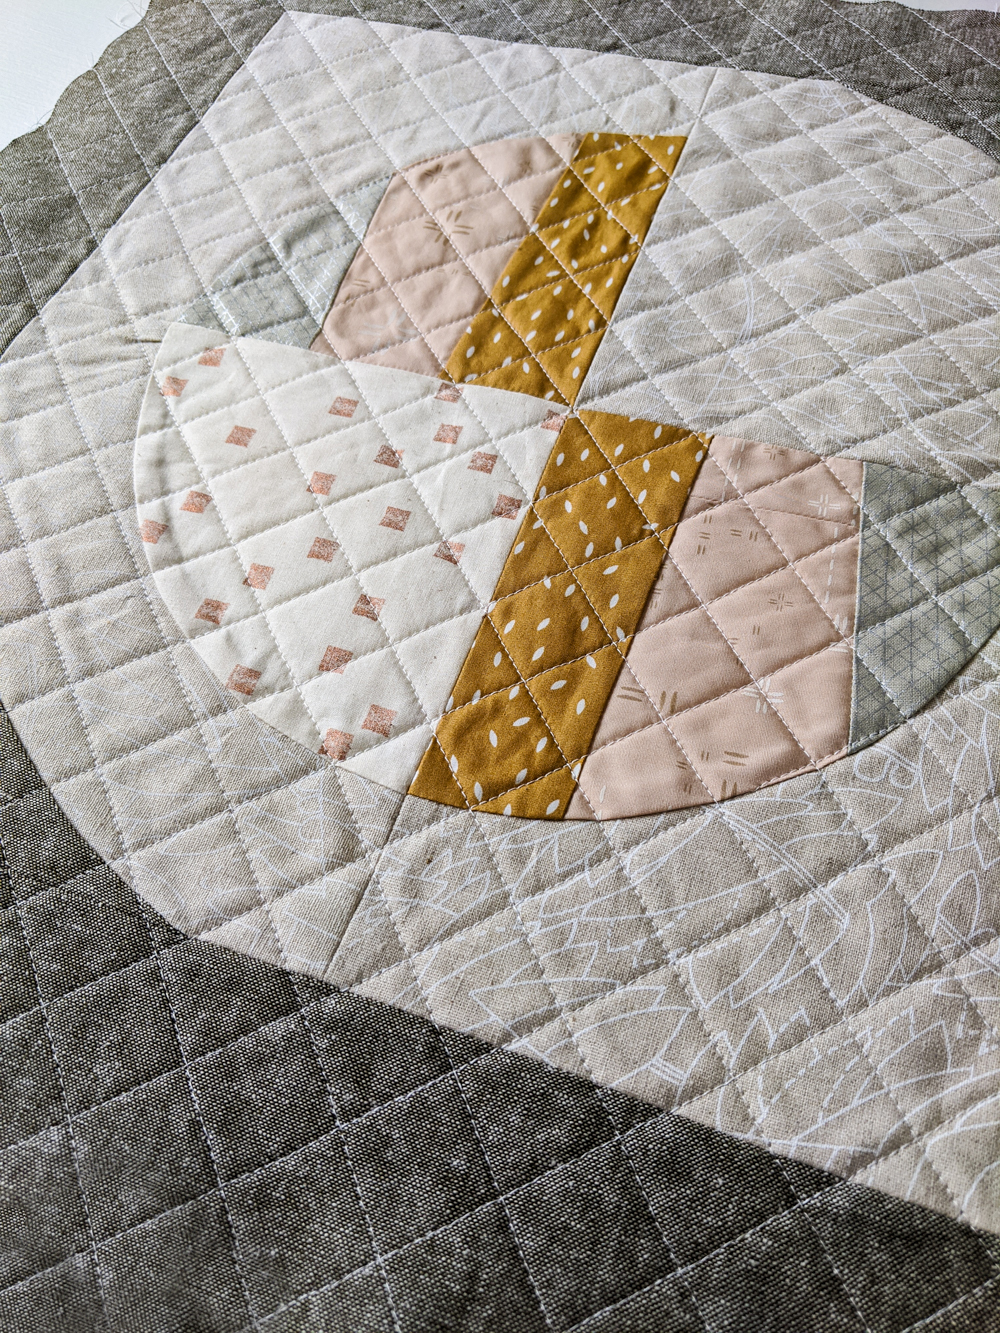 This FREE quilted tote bag tutorial shows step by step how to create a large tote bag using the Modern Fans quilt block pattern. suzyquilts.com #quilting